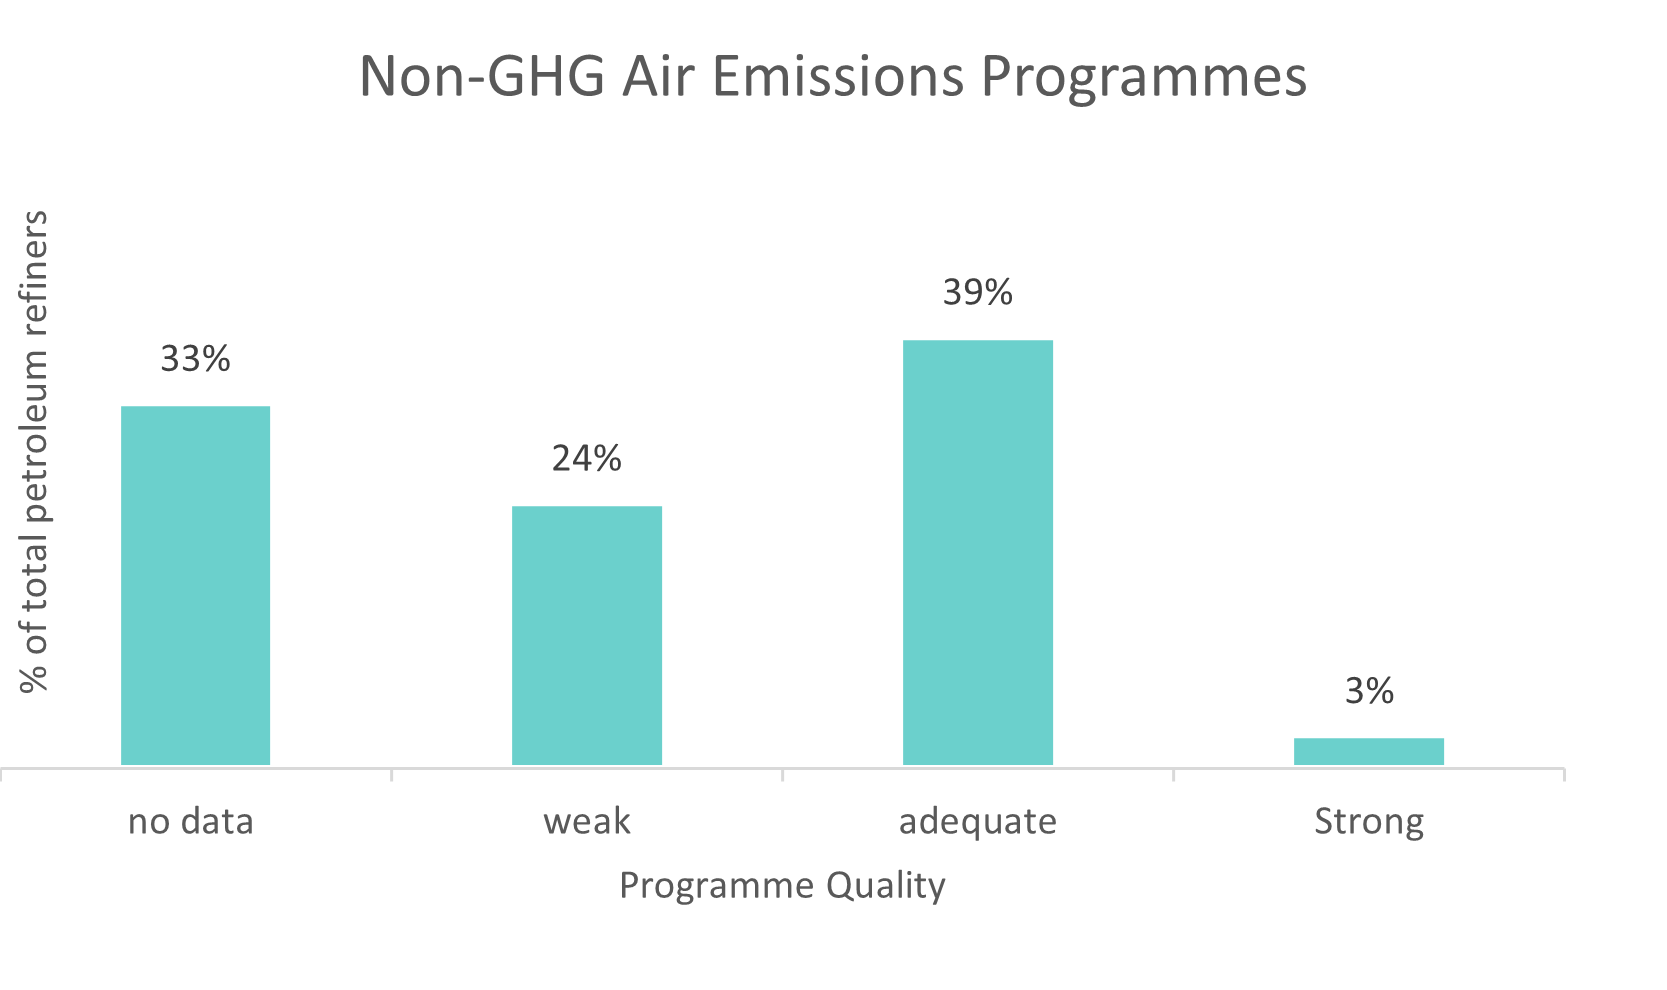 non-GHG emissions to air